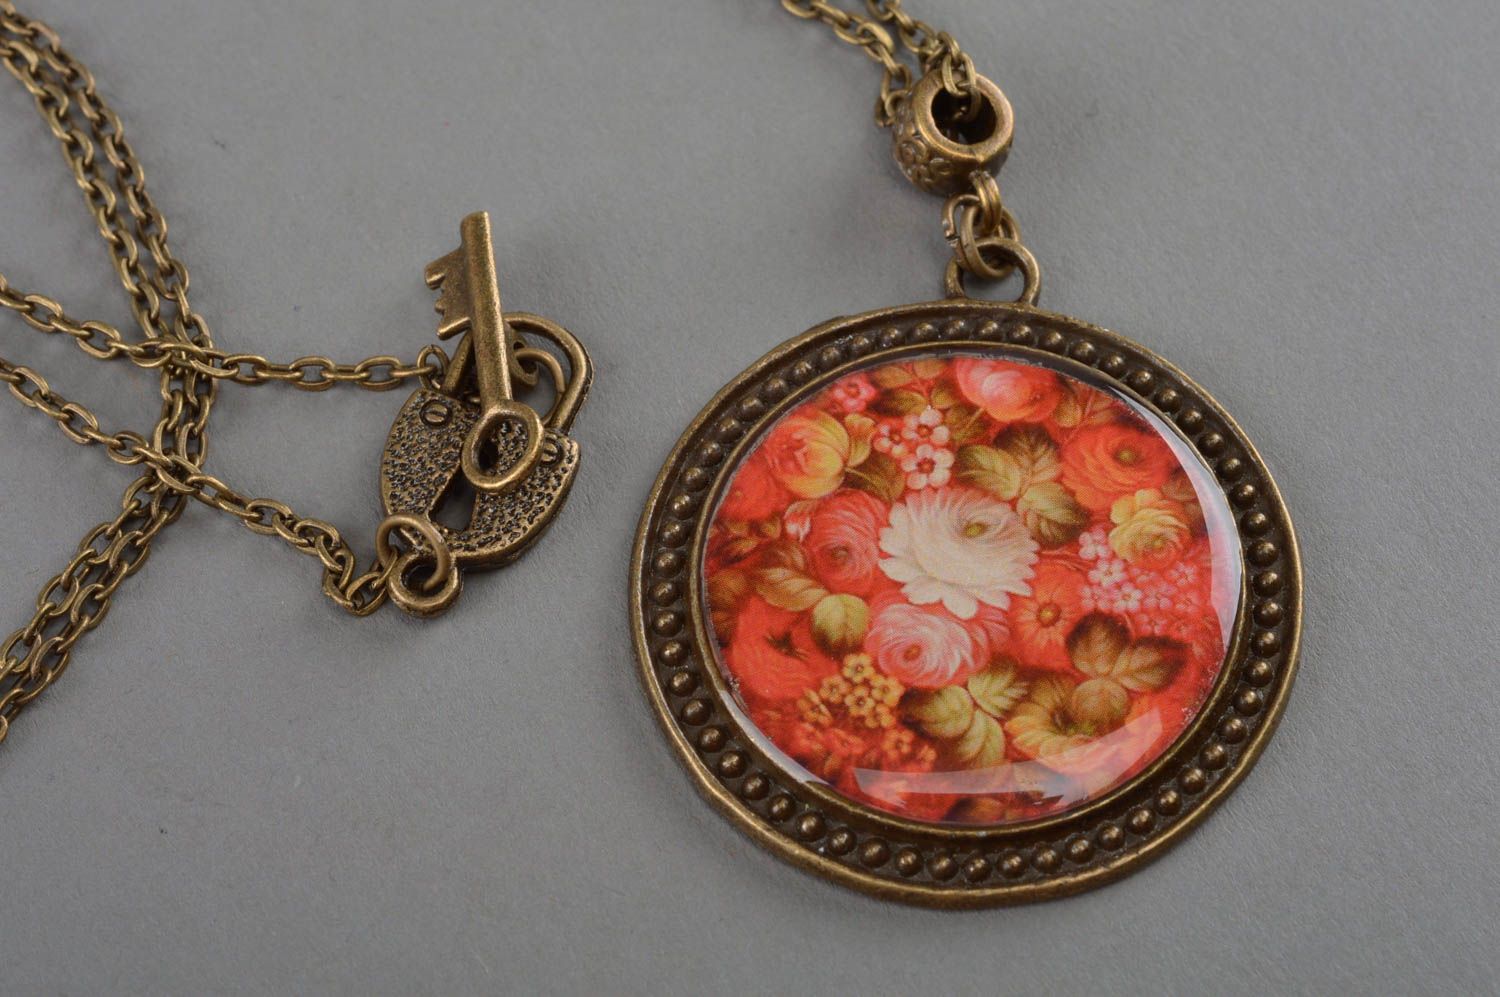 Handmade round decoupage pendant necklace with floral image in jewelry resin photo 2